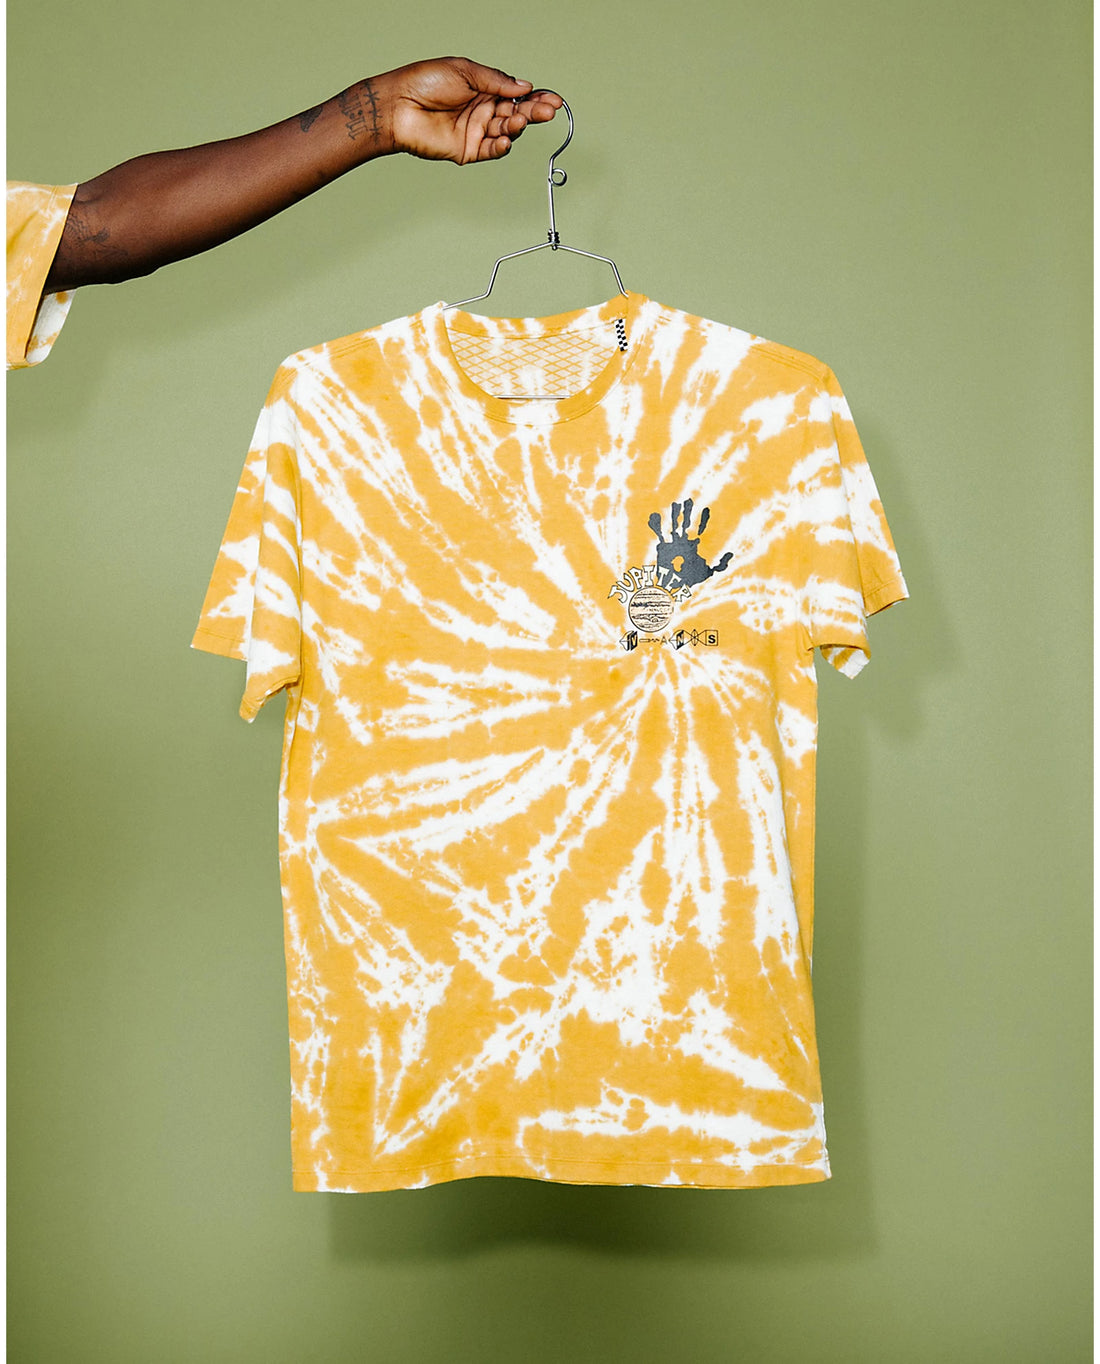 Vans Skate OFF THE WALL TIE-DYE TEE X ZION WRIGHT